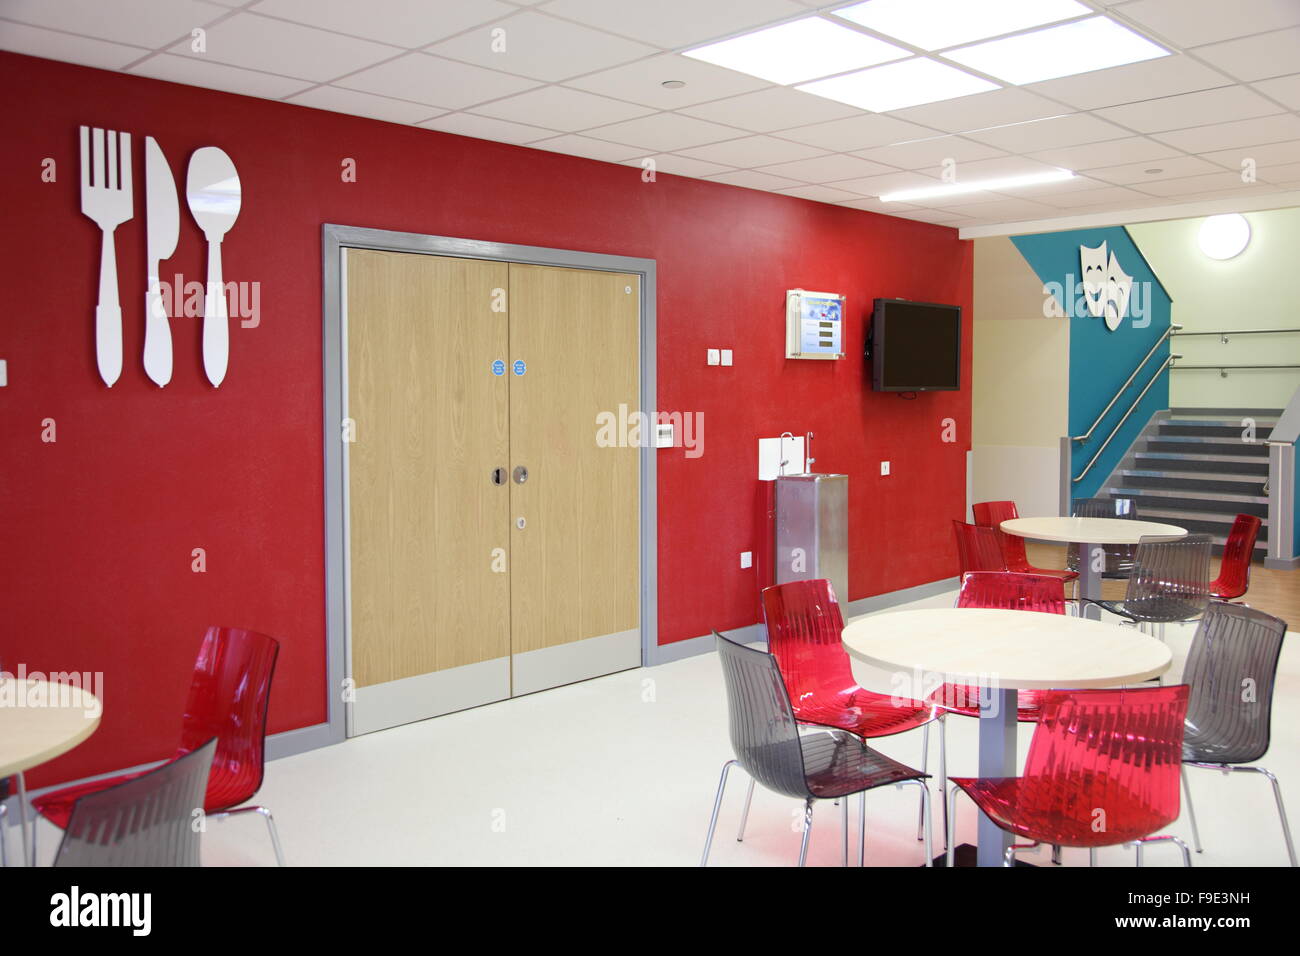 restaurant area in a new academy school featuring a red and grey colour scheme with large knife and fork symbols mounted on wall Stock Photo